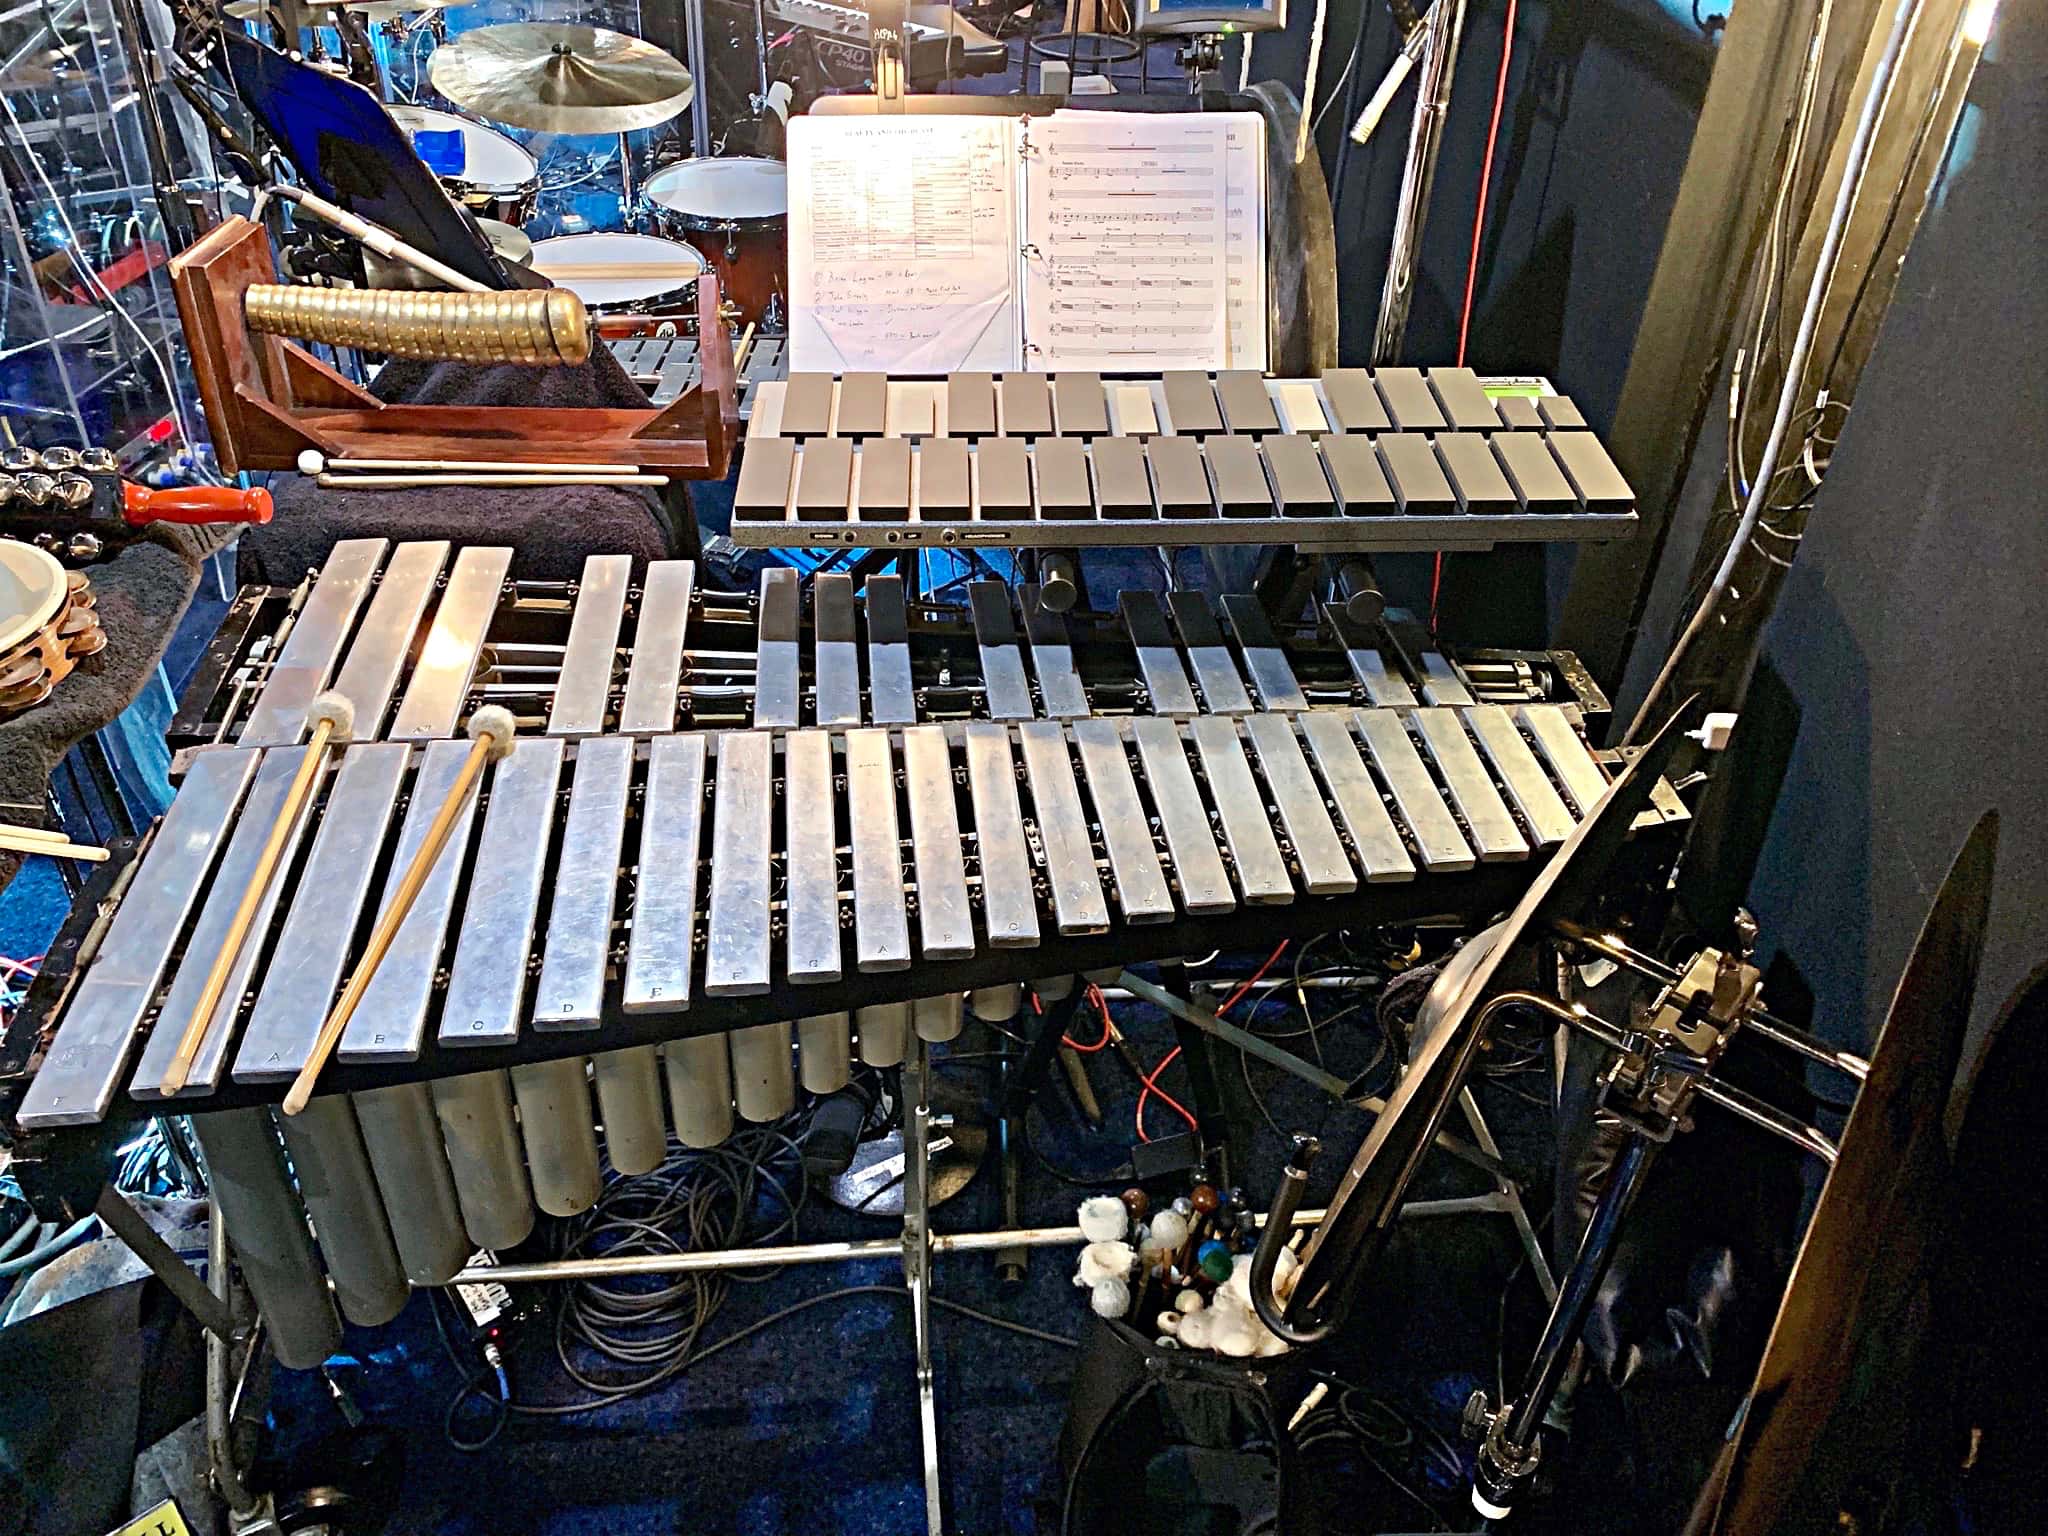 Luke Hubley’s percussion setup for Beauty and the Beast at Theater Under The Stars in Houston Texas.